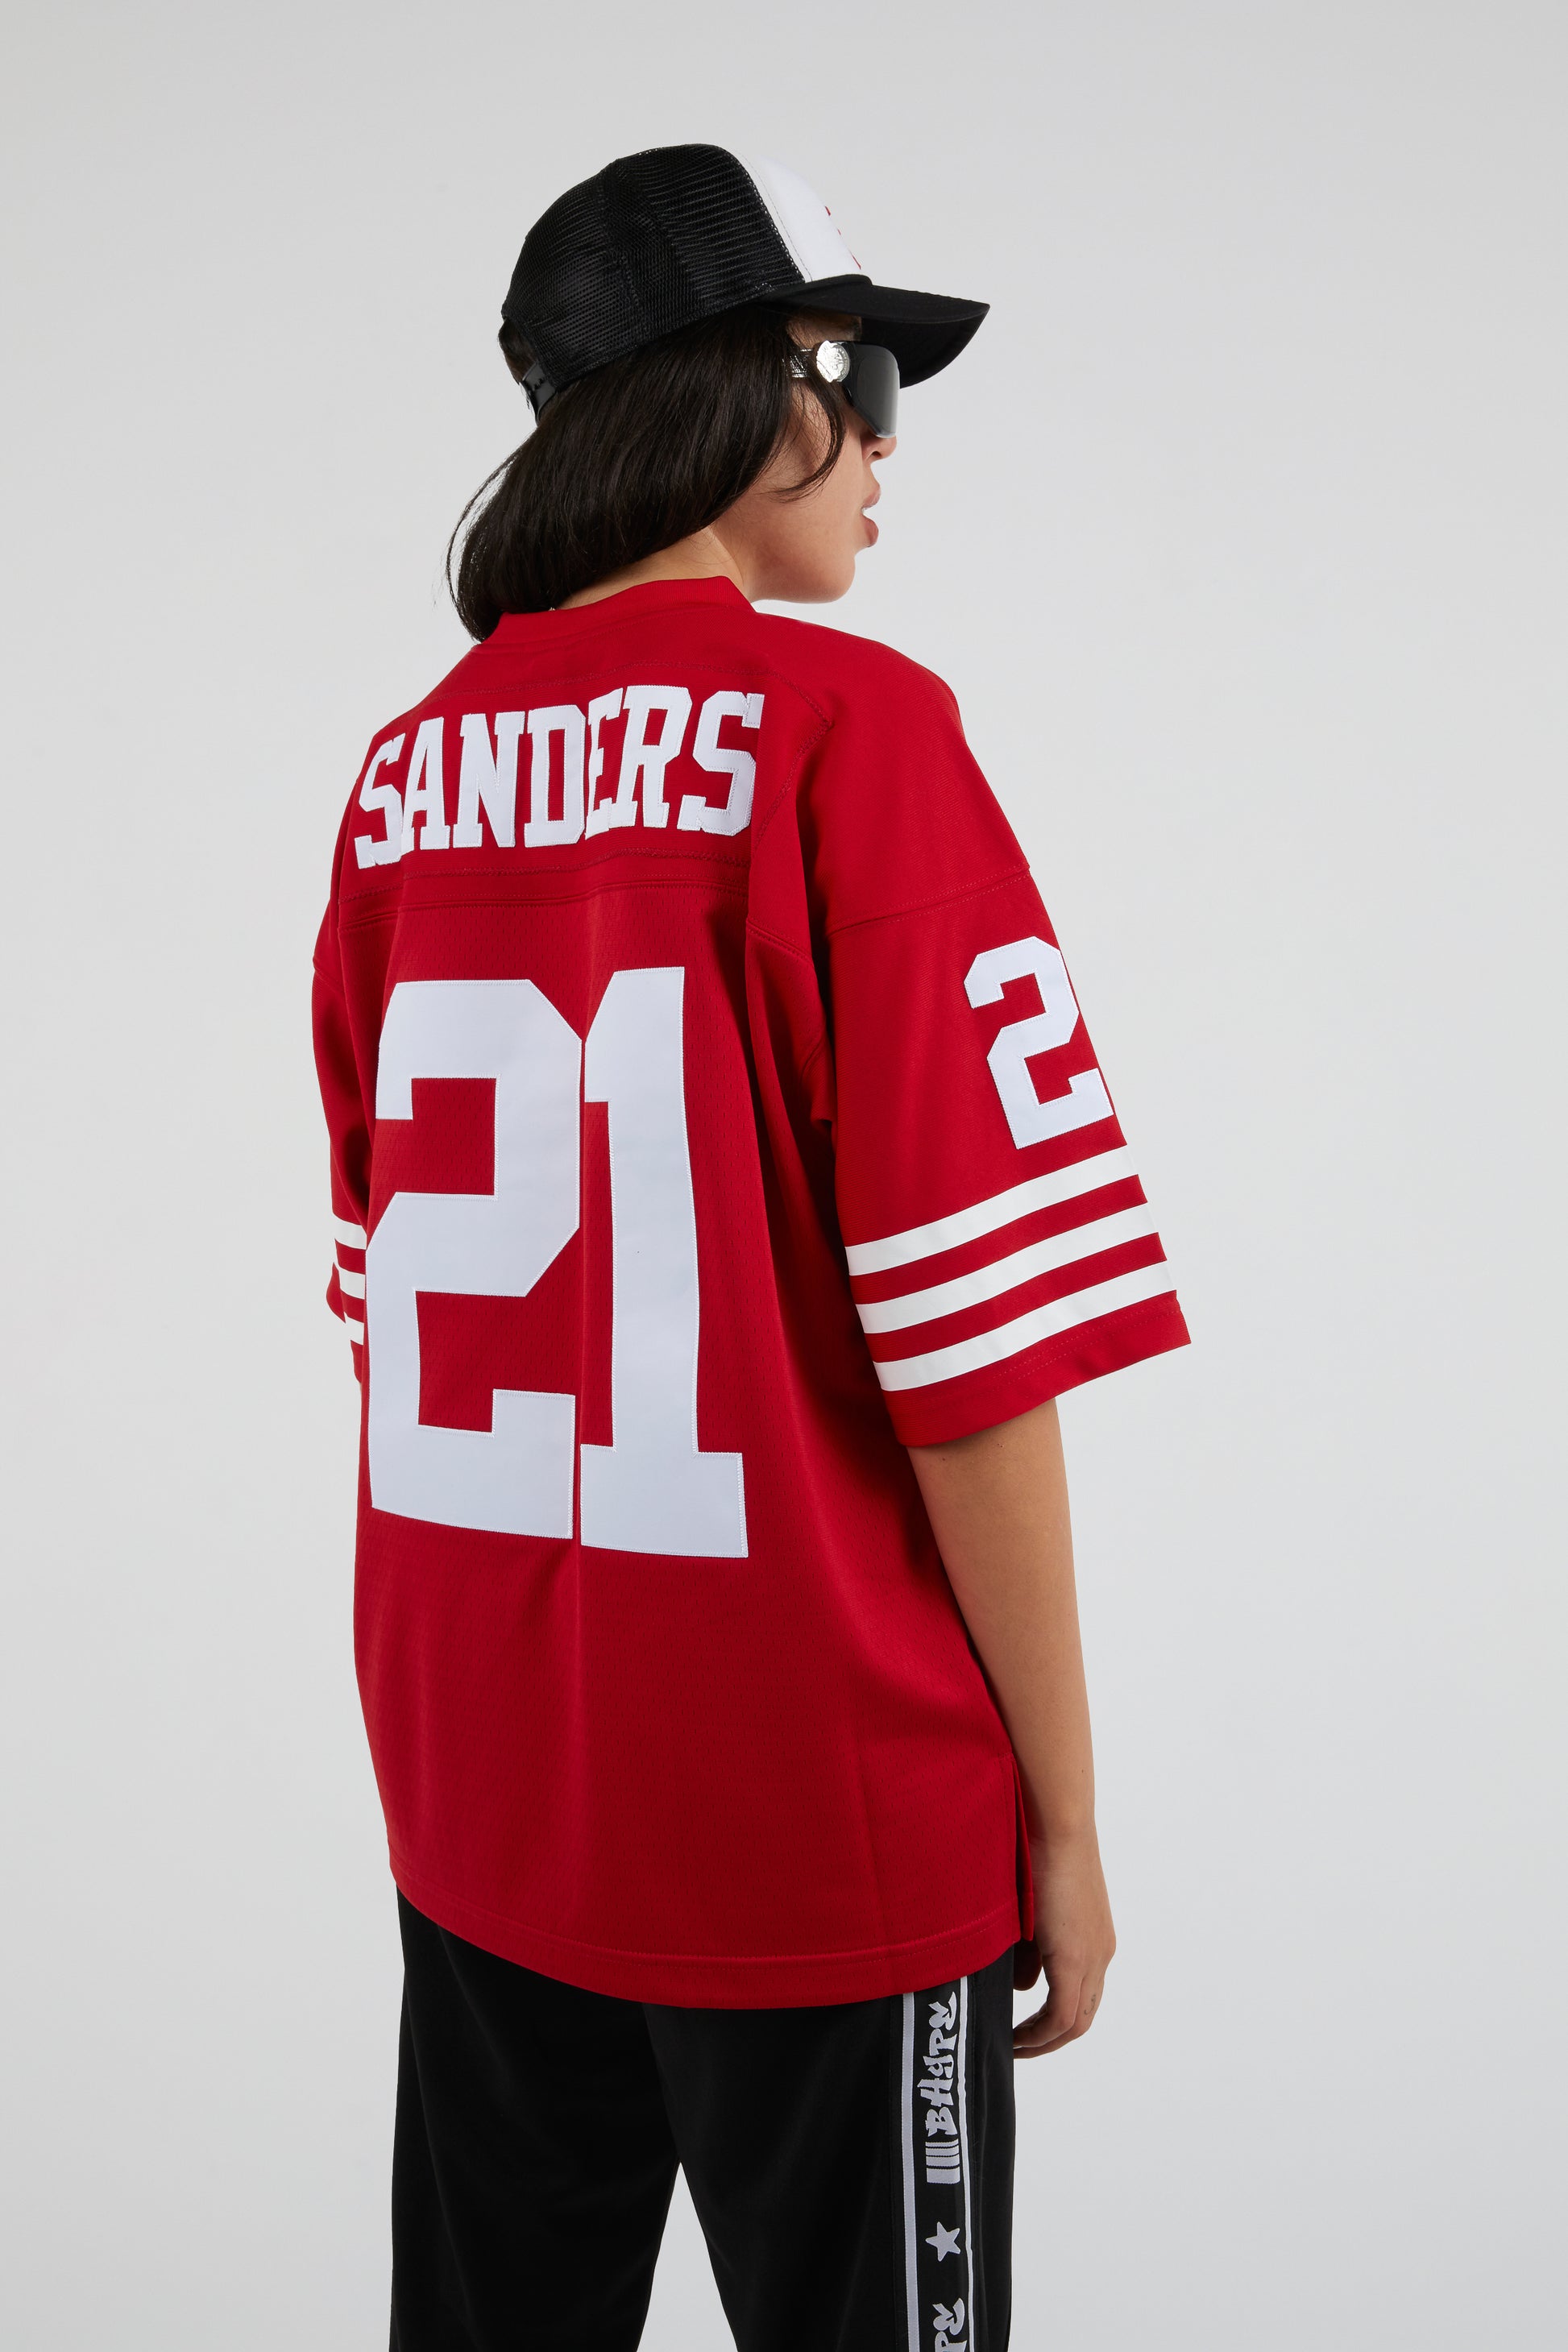 Barry Sanders Mitchell and Ness Authentic Jersey vs Legacy Jersey